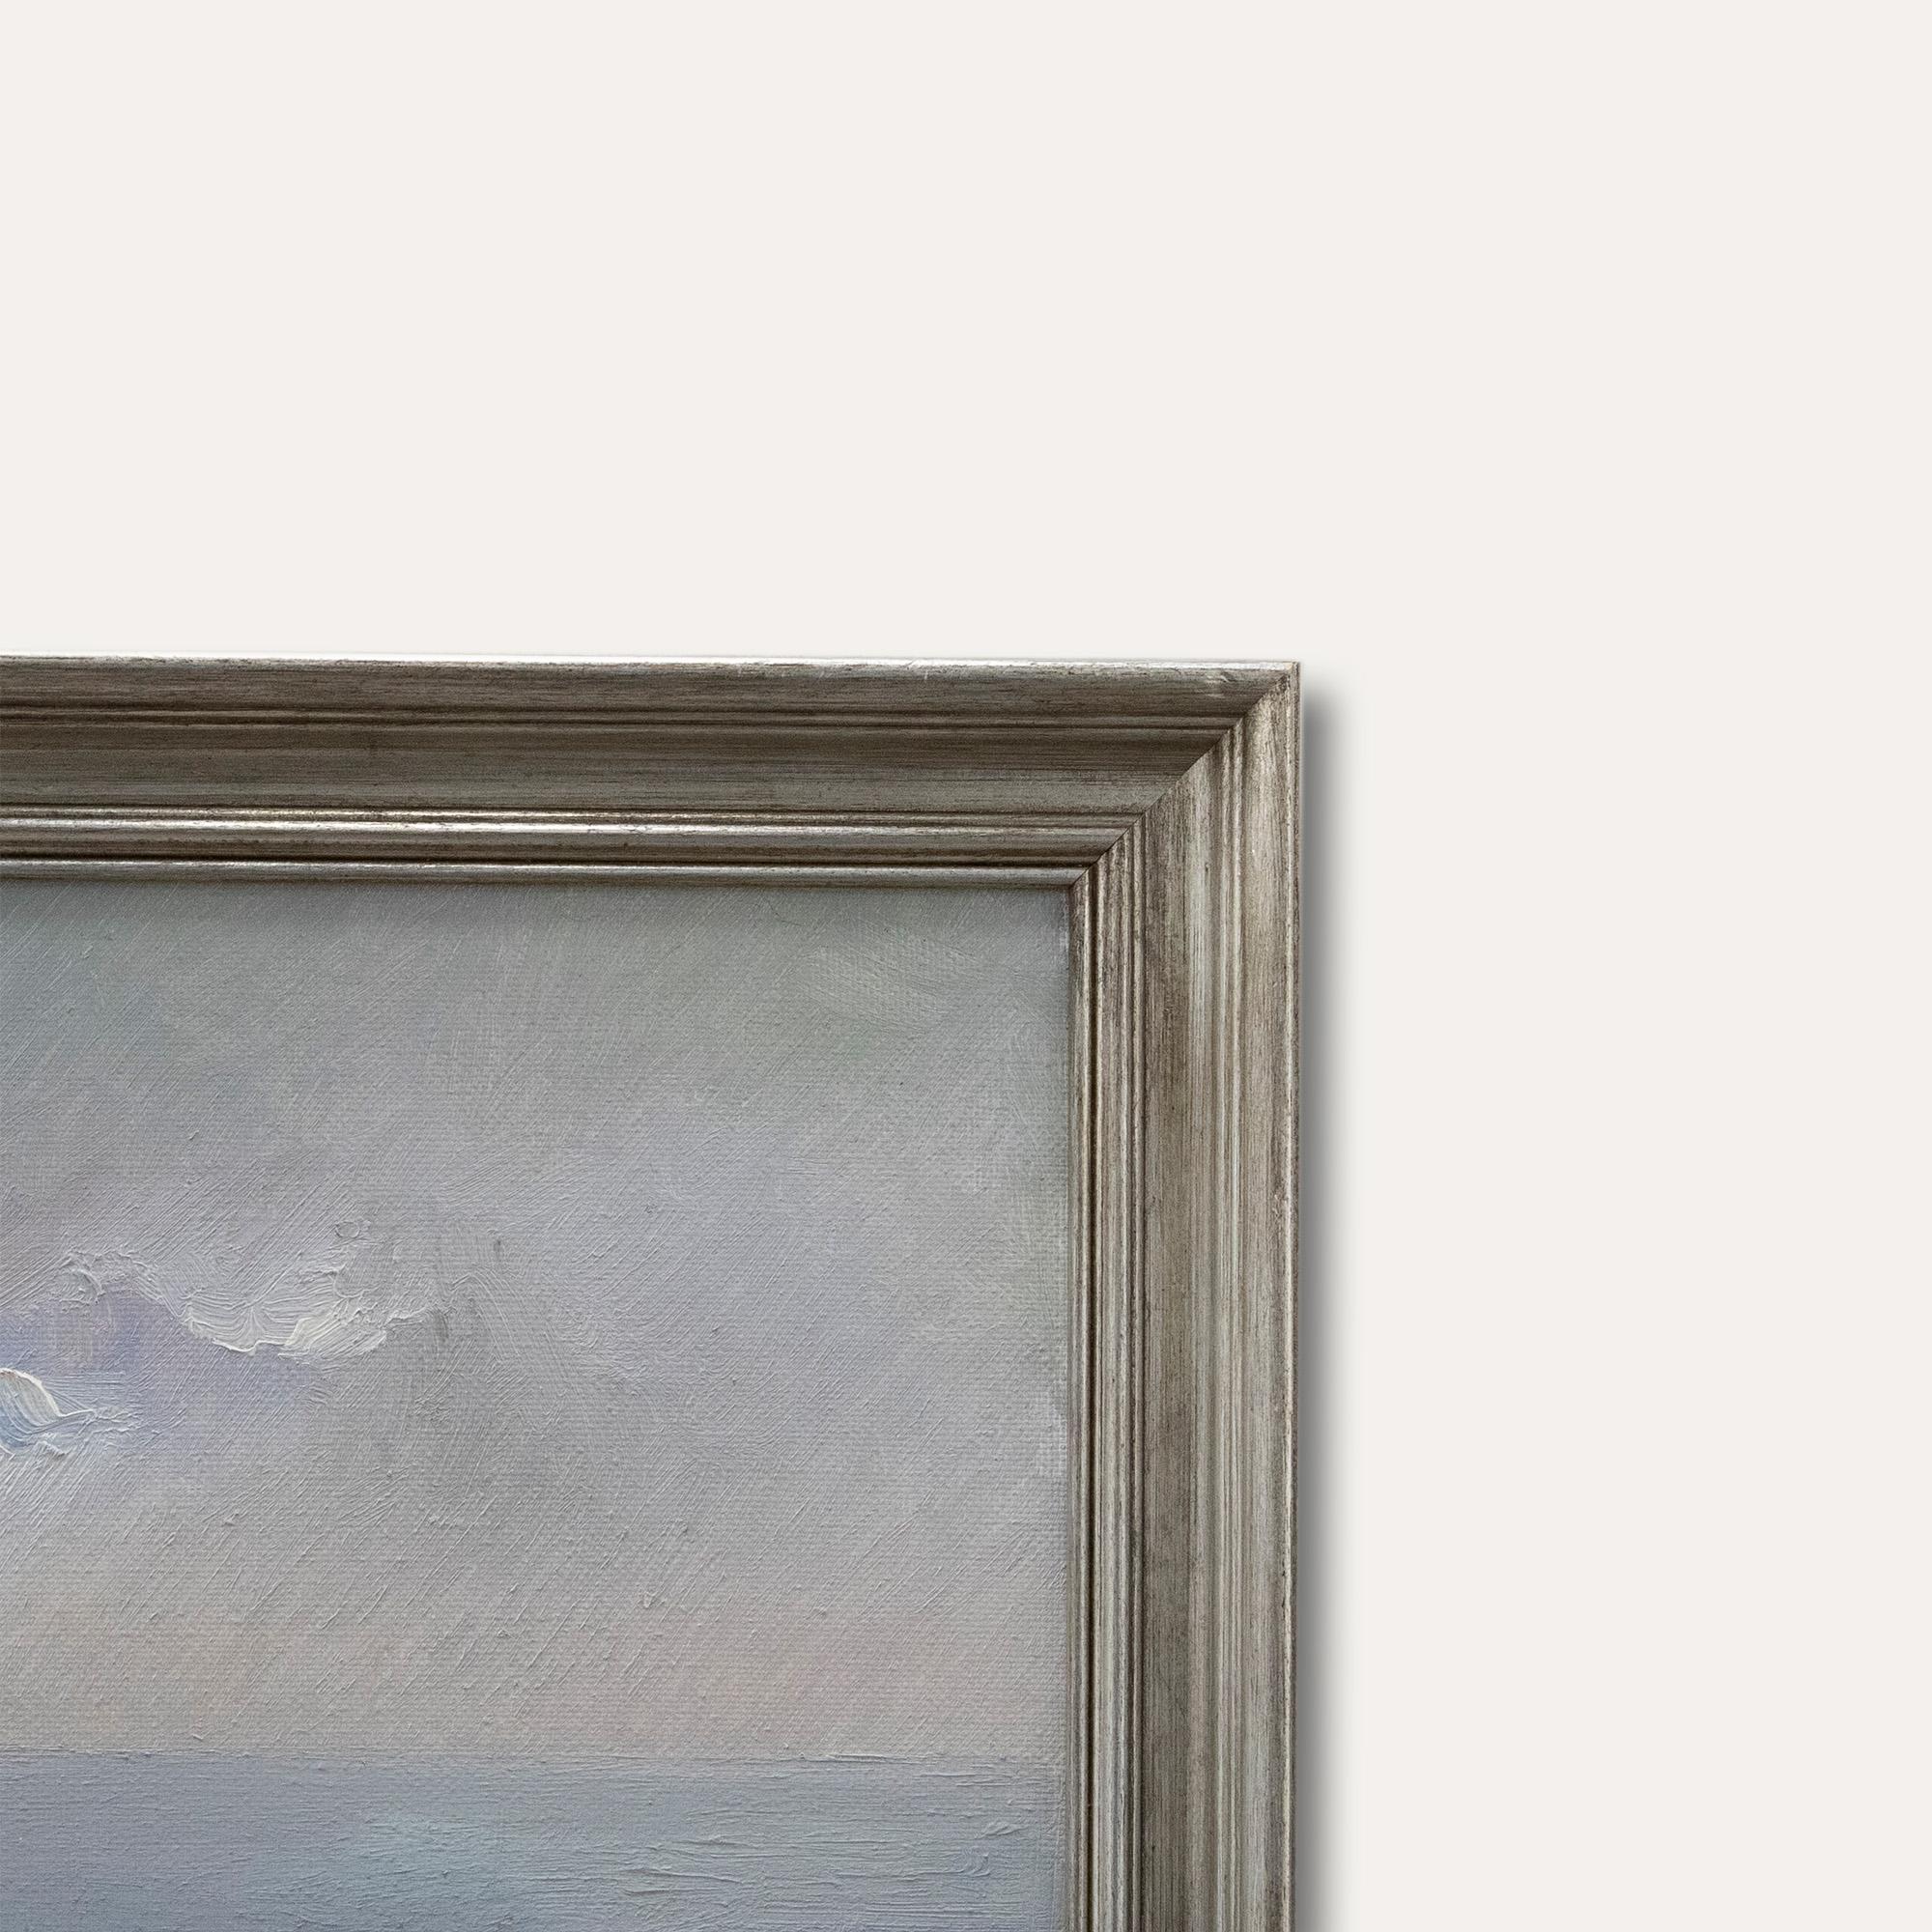 An impressionist depiction of coastal rain falling on the horizon. Well presented in a contemporary silver-effect frame. Indistinctly signed. On canvas on stretchers.